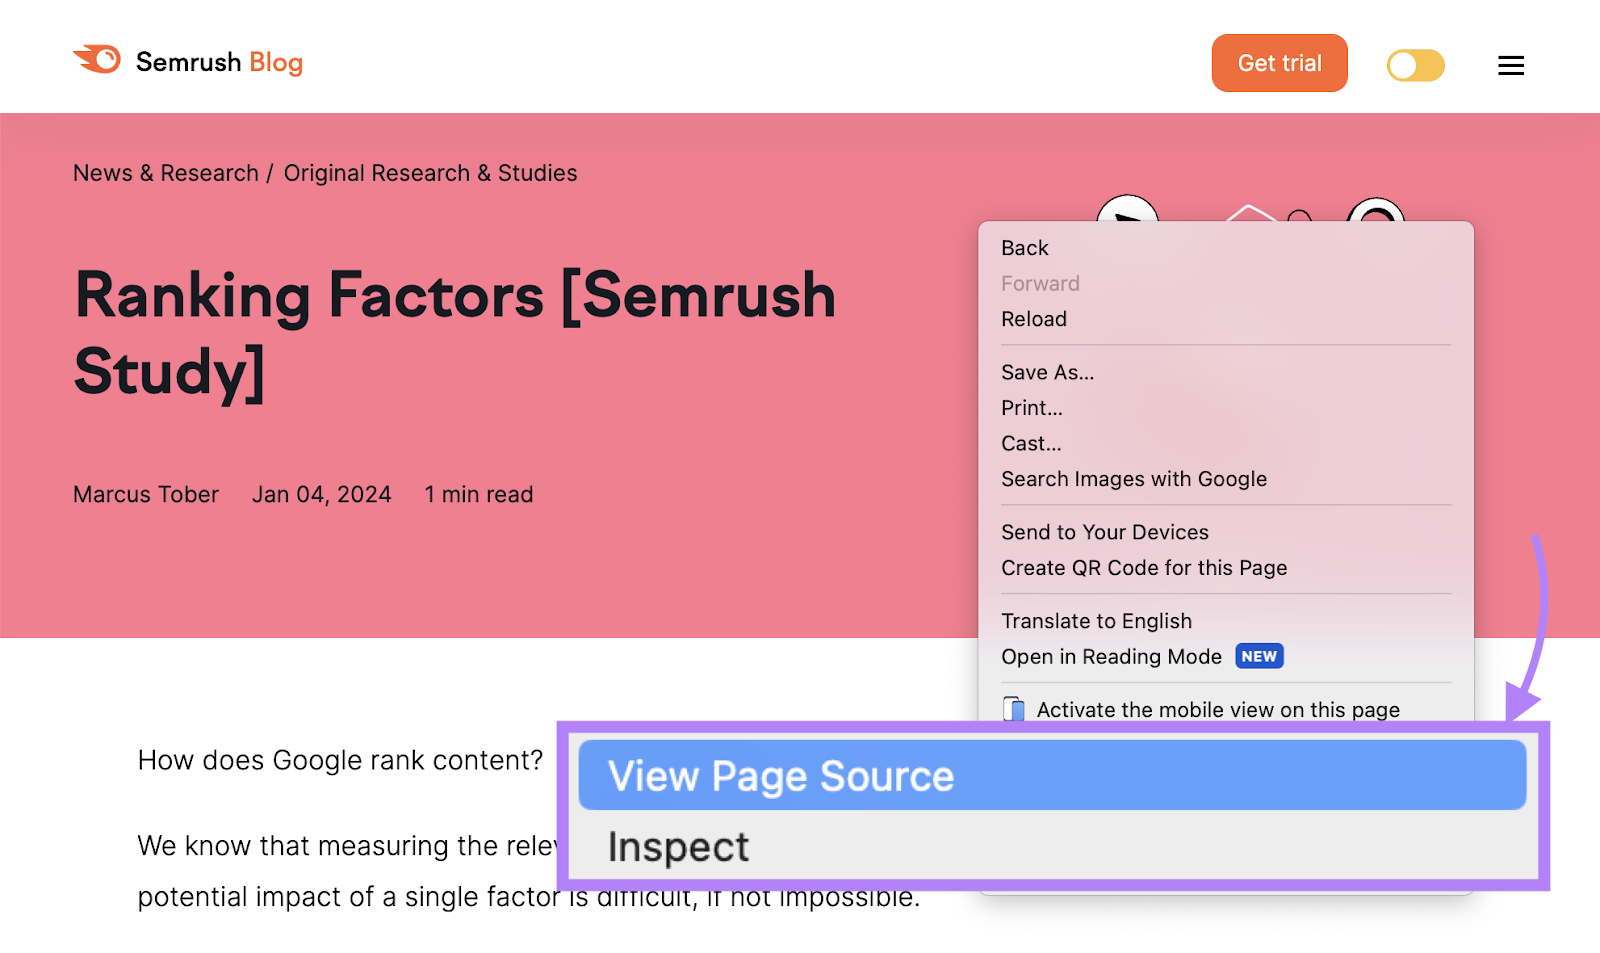 “View Page Source” fastener  connected  Semrush Blog page